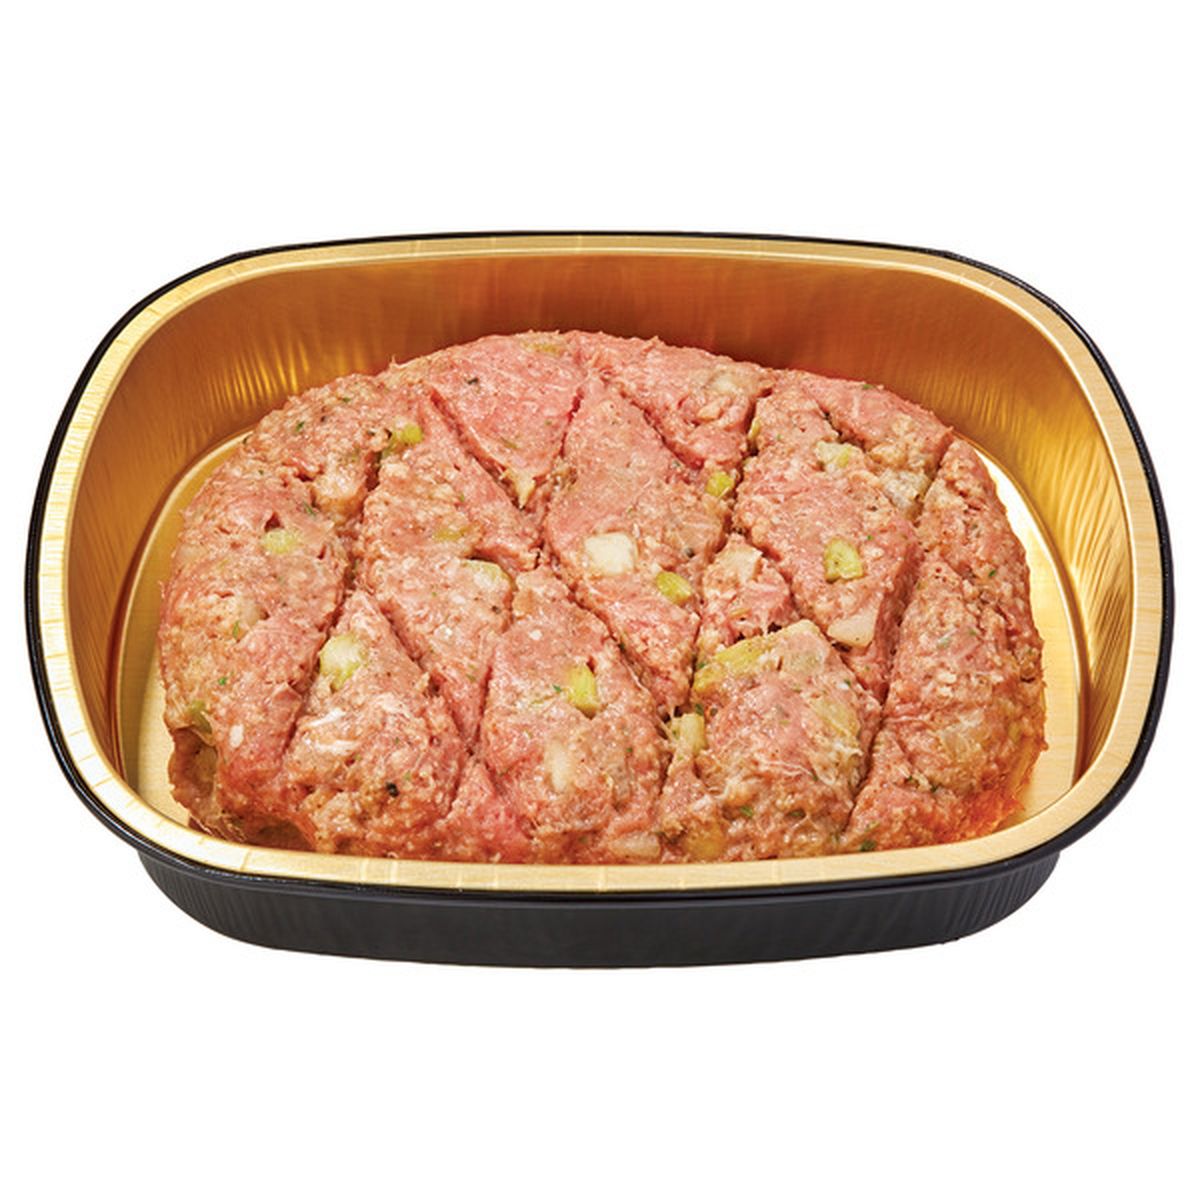 Calories in Wegmans Ready to Cook Turkey Sage Meatloaf, Large